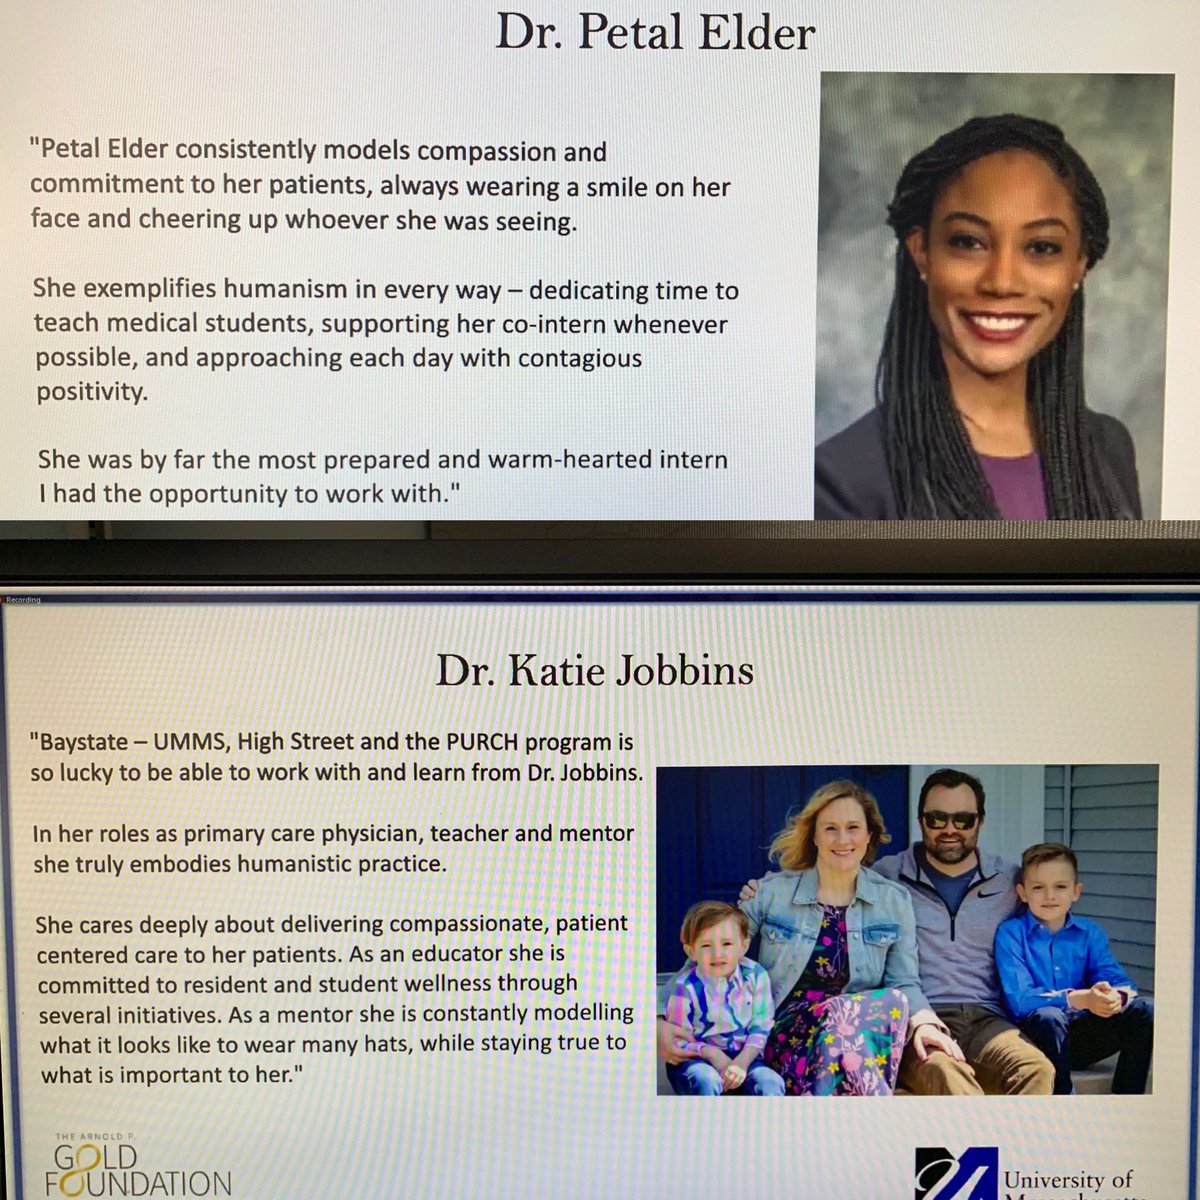 Congratulations to Dr. Petal Elder, PGY1 resident and @Kfoy13 for being inducted into the Gold Humanism Honor Society UMMS Chapter. 
Your humanism shines through everything you do. 
We are so lucky and proud to call you our own! 
#goldhumanismhonorsociety #medtwitter #IMProud